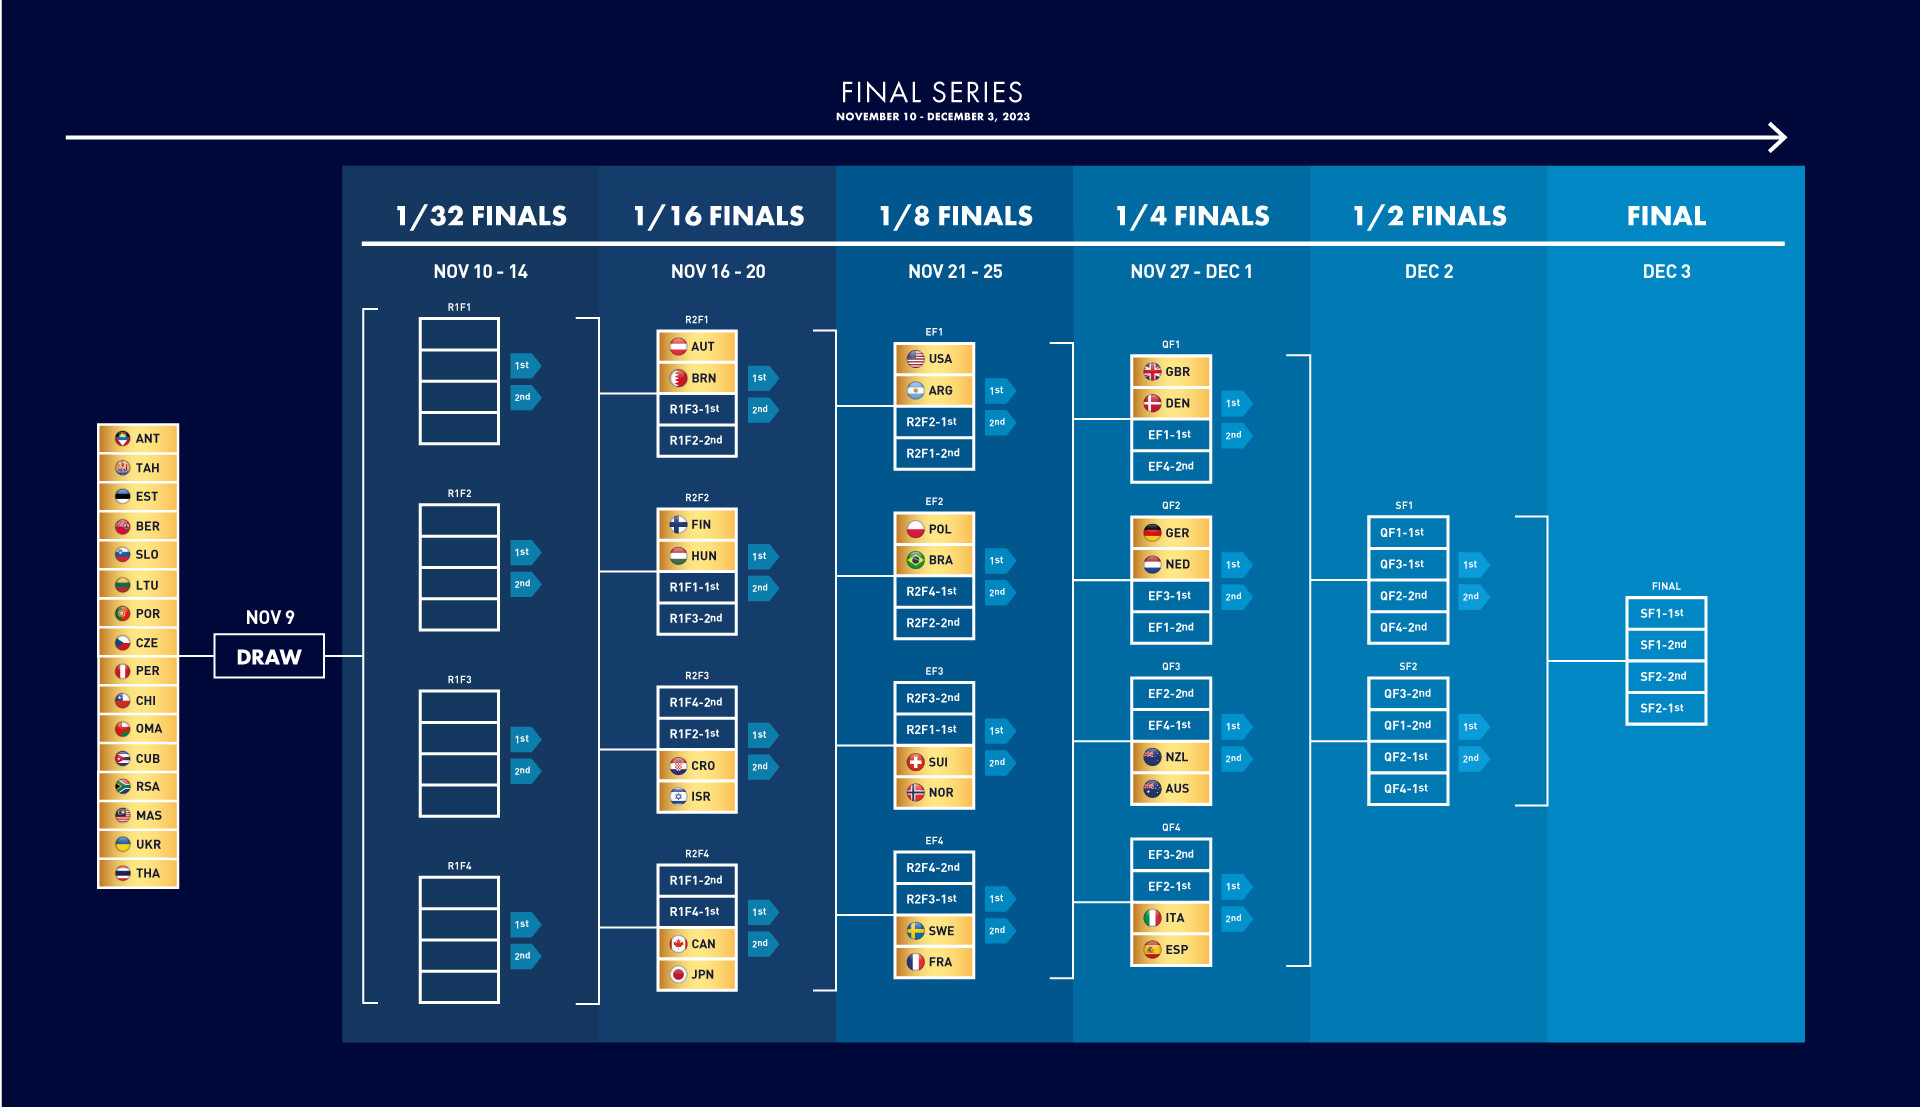 THE EXCITING SSL GOLD CUP FINAL SERIES FORMAT!